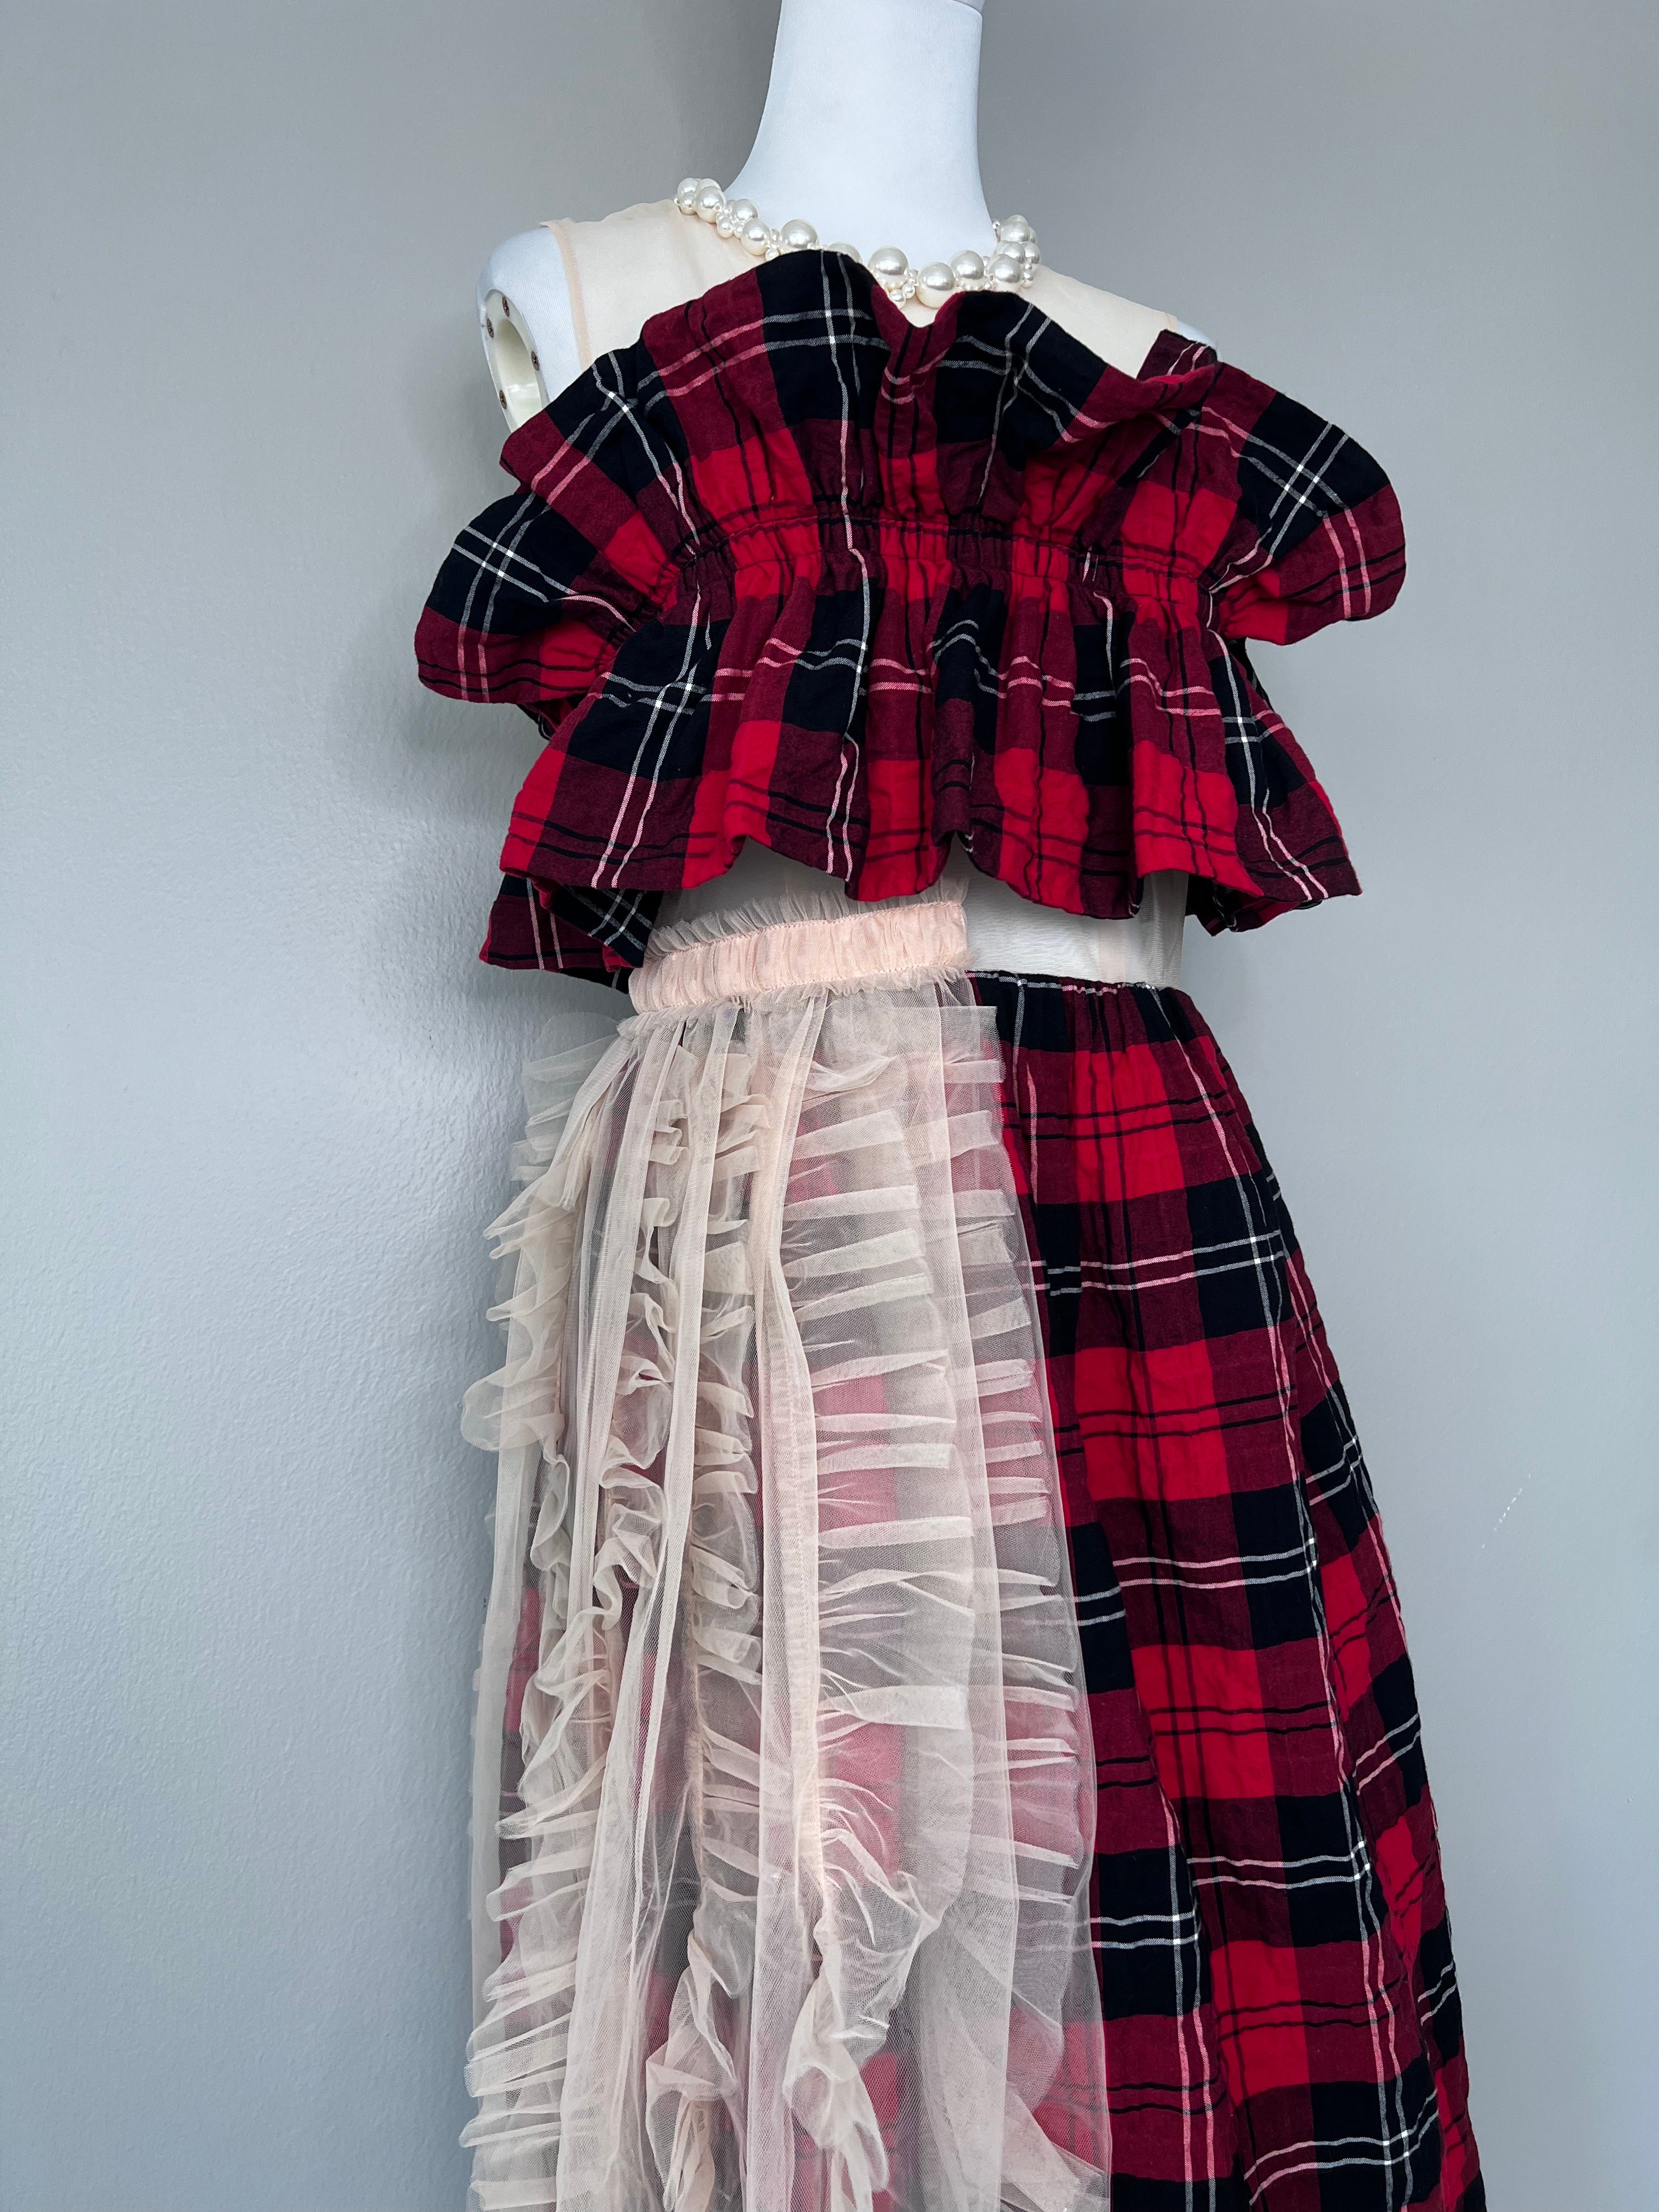 Red plaid two-layered dress with mesh ruffled and pearls across neckline - SIMONE ROCHA X H&M